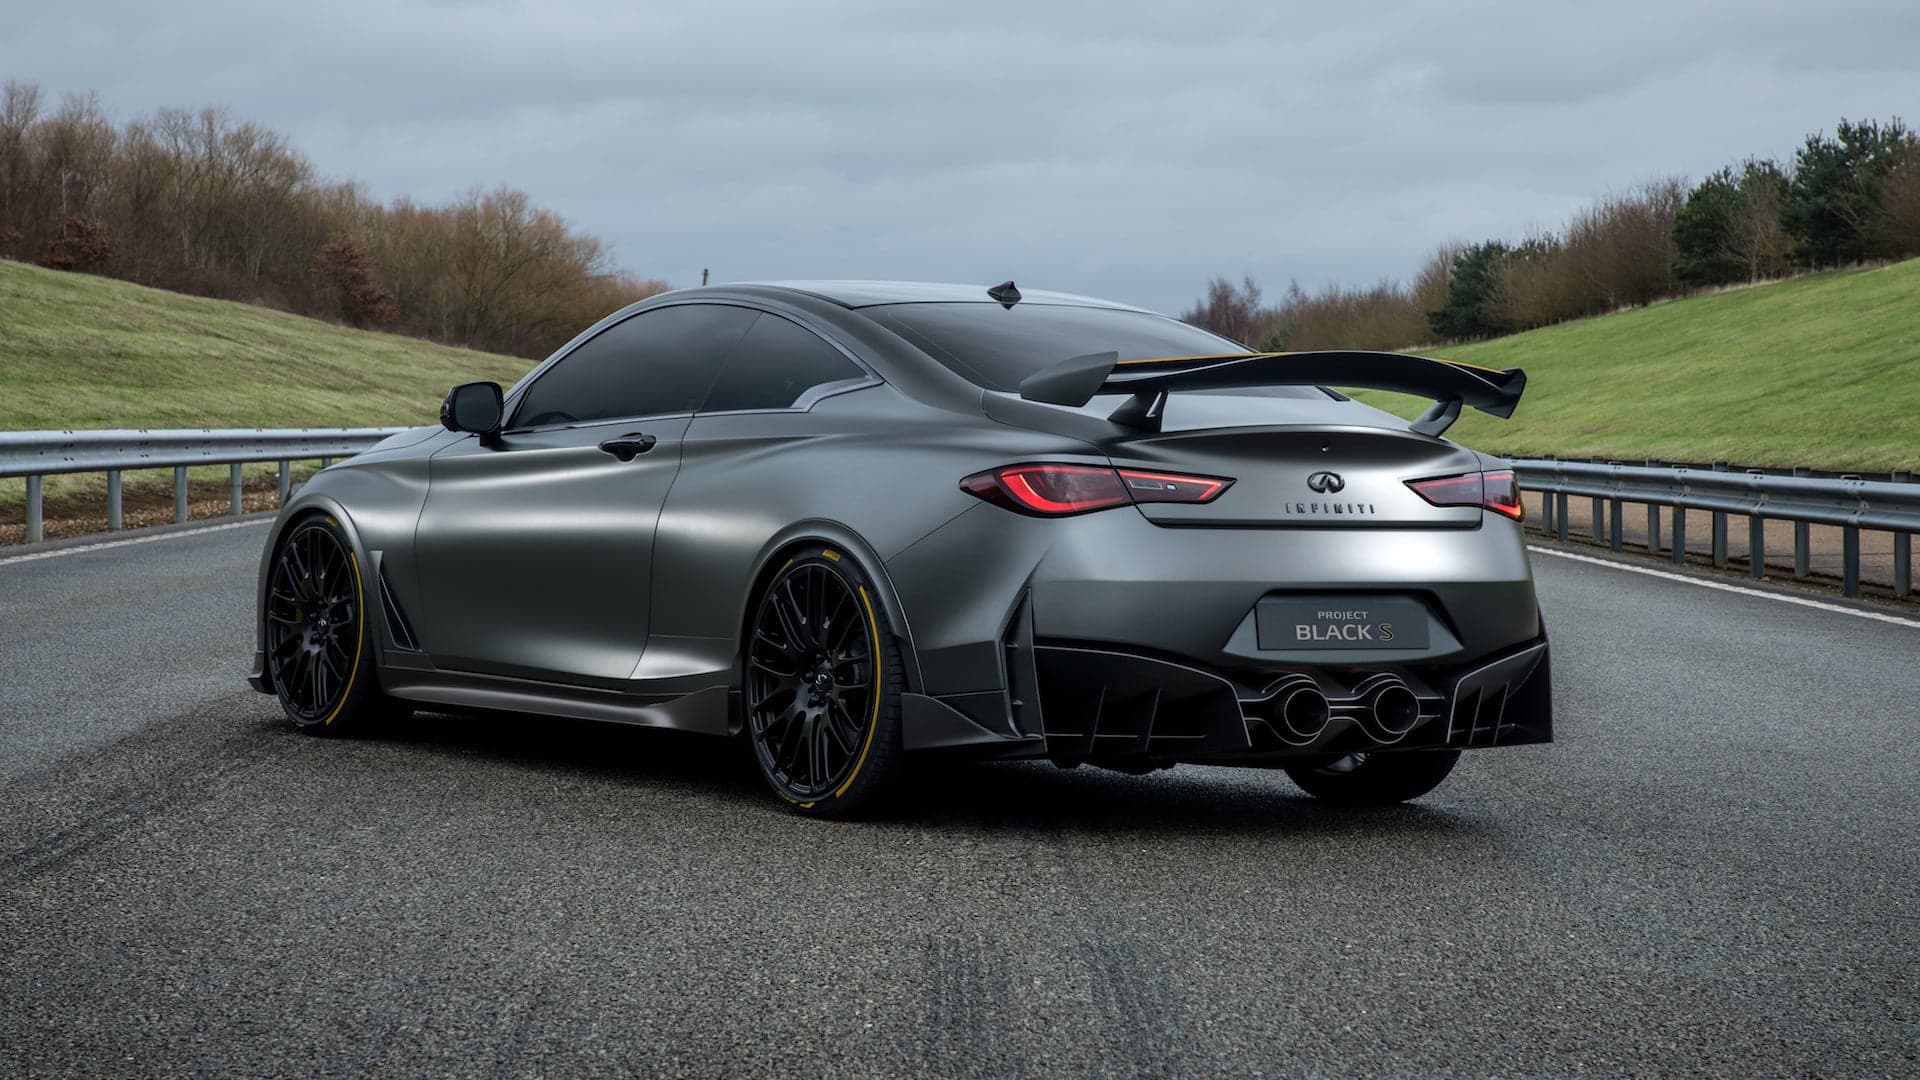 Formula 1-Inspired Infiniti Q60 Black S Rumored to Be on Its Way to Production